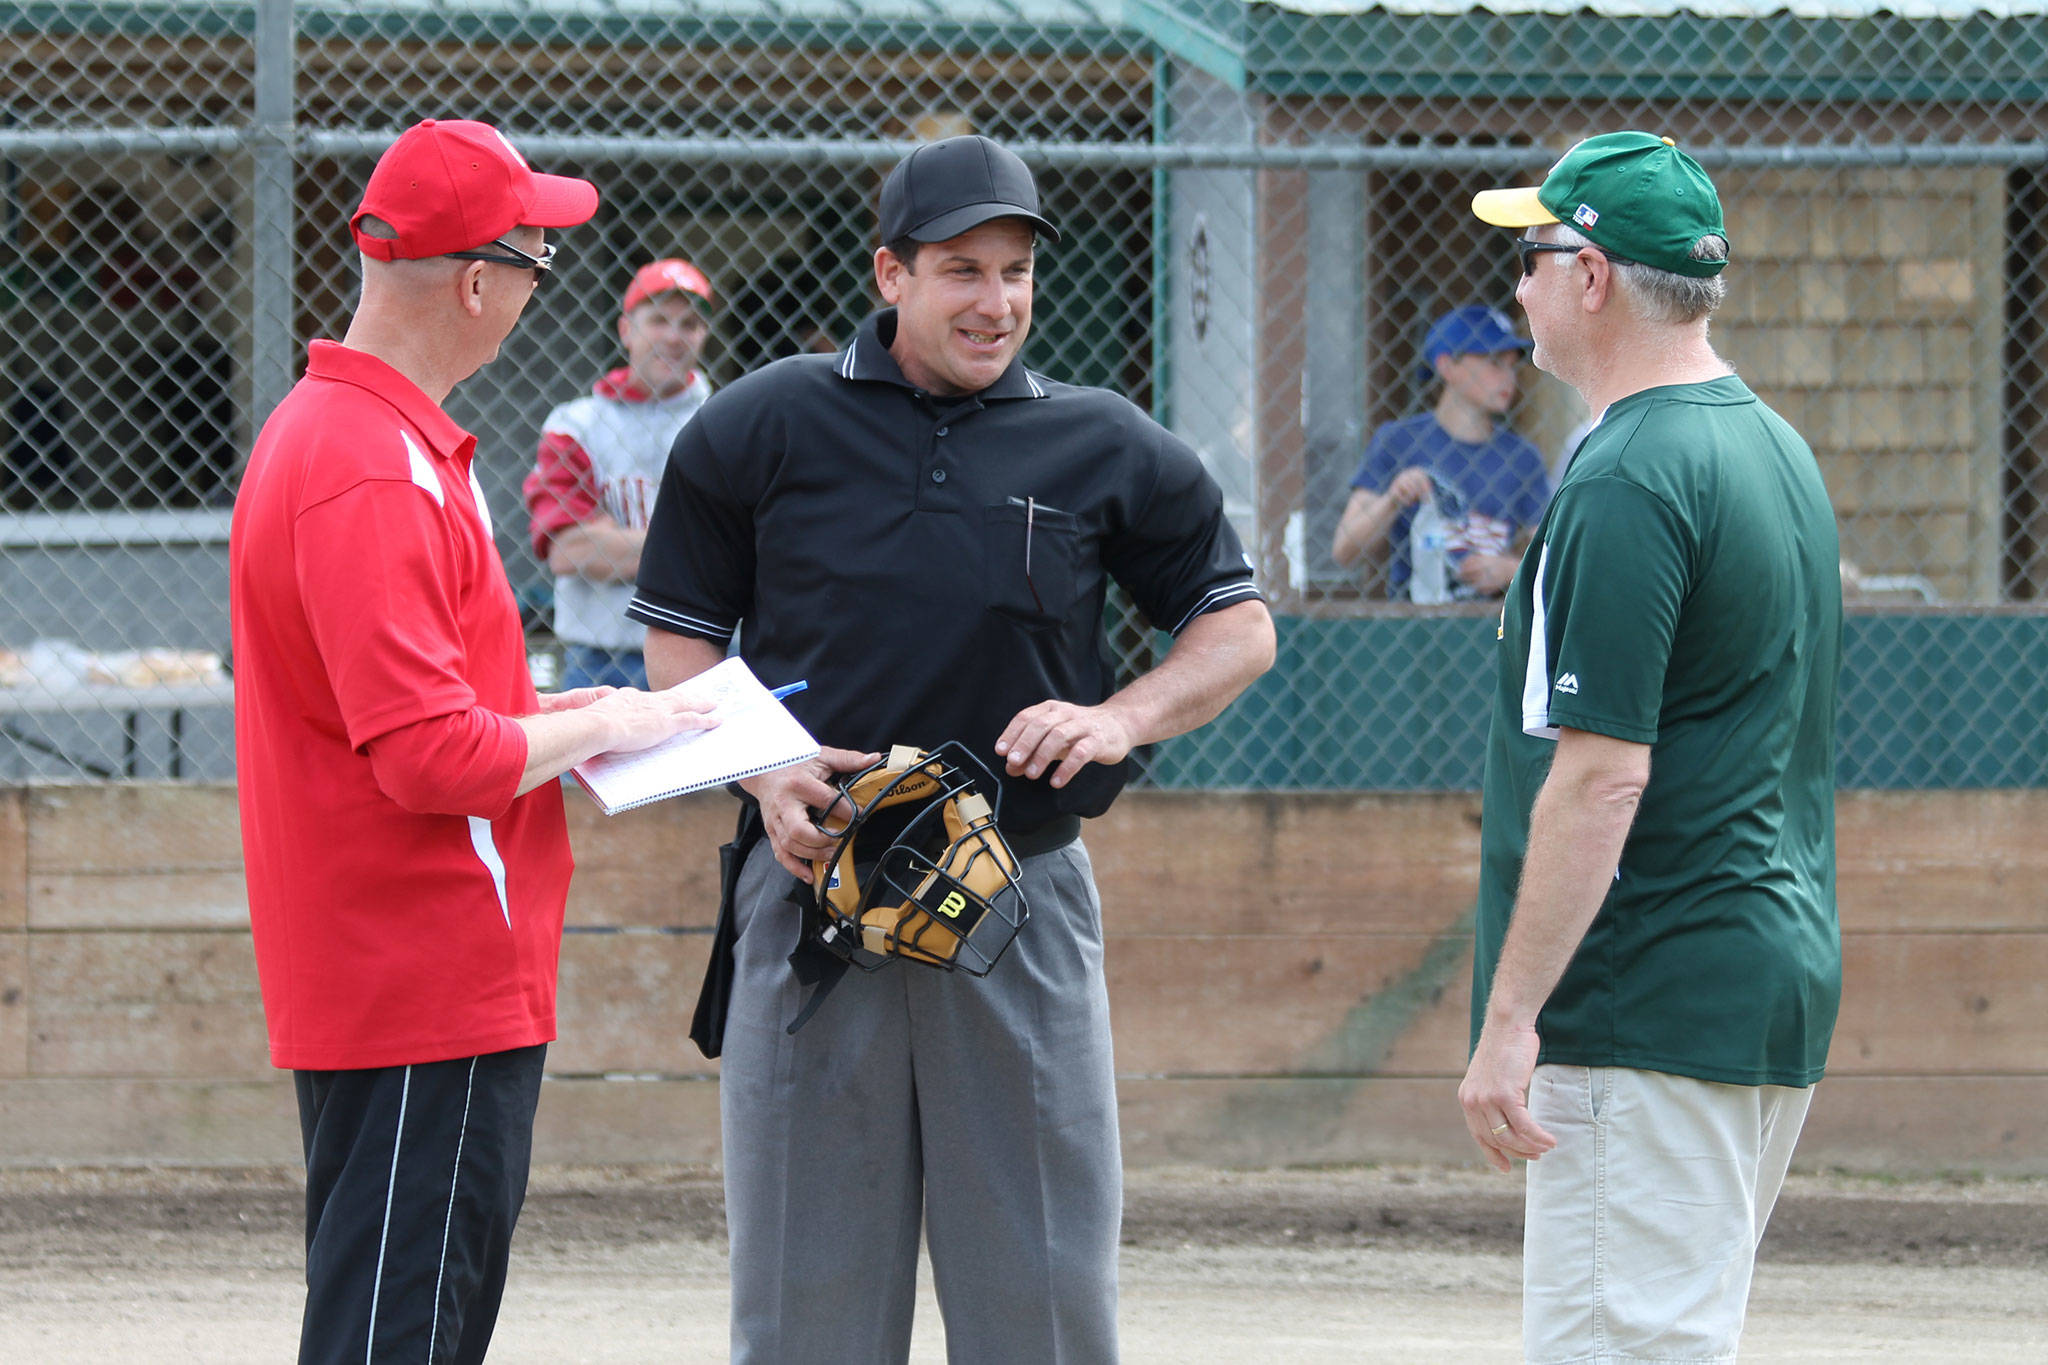 Umpire Jim Honold, center, goes over the ground rules with Central Whidbey coach Jon Roberts, left, and South Whidbey Athletics’ coach Steve Zarifis. (Photo by Jim Waller/South Whidbey Record)